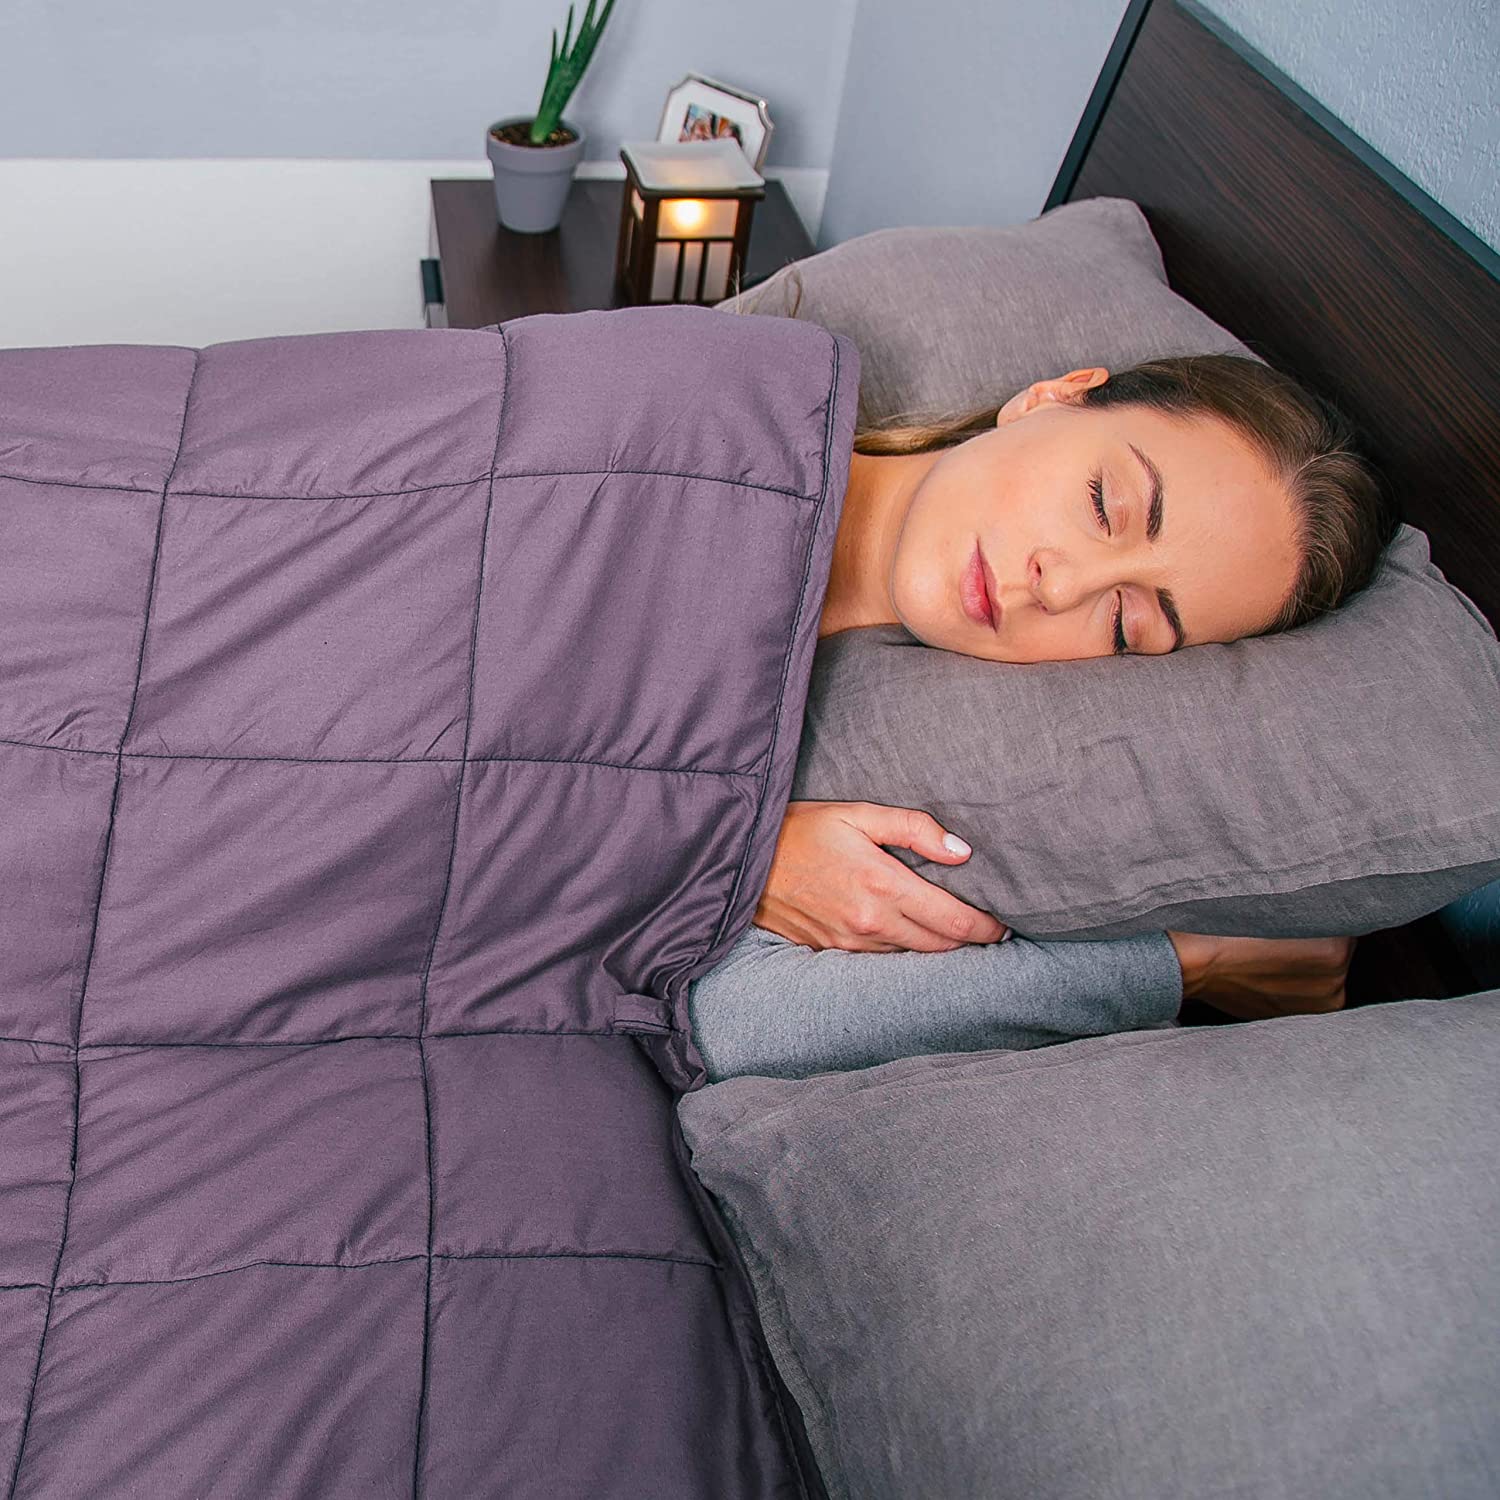 A woman sleeping with a weighted blanket over her